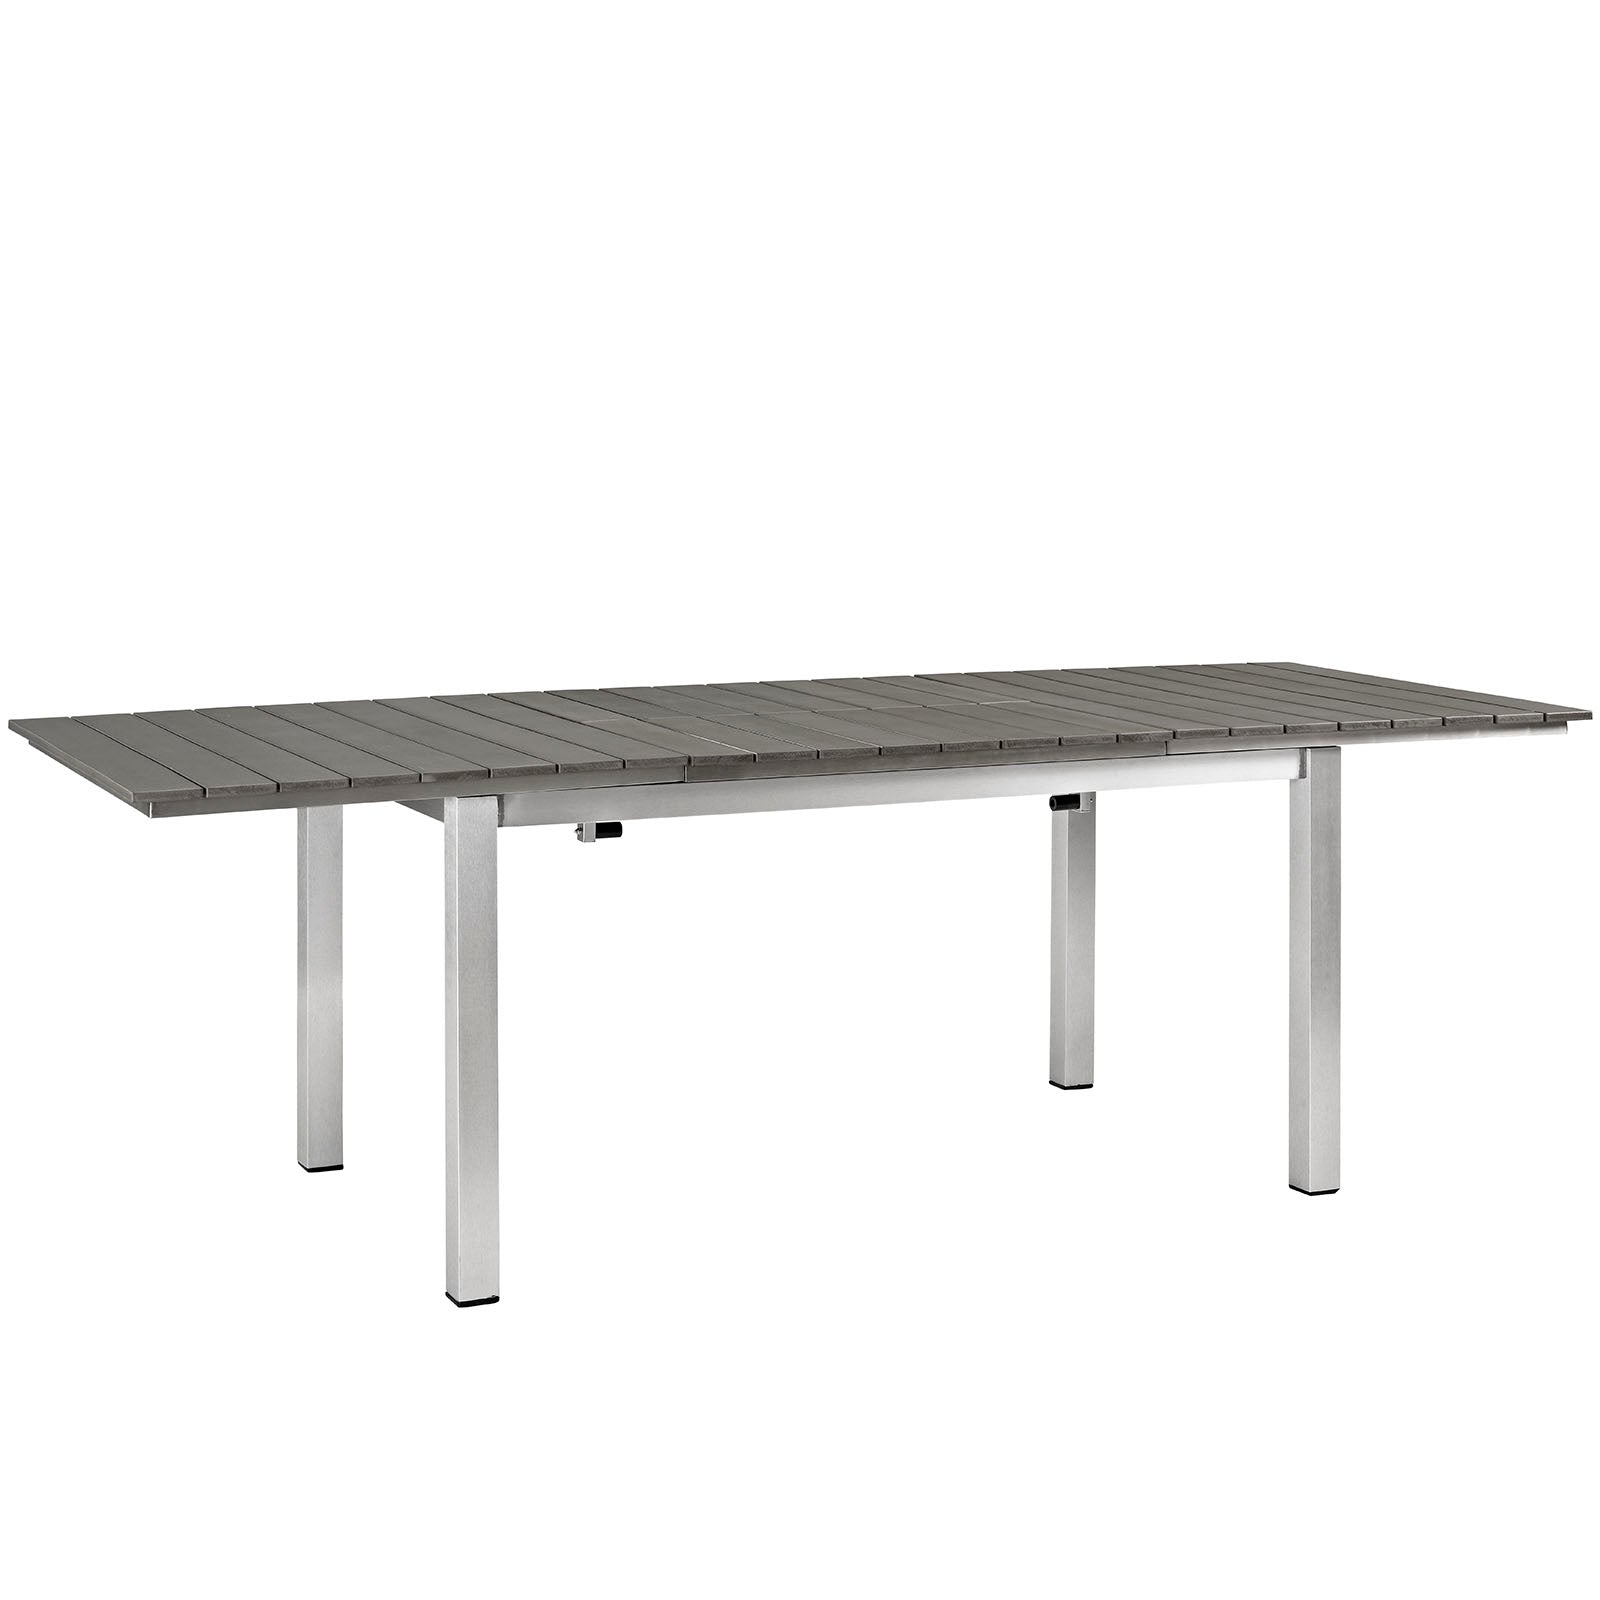 Shore Outdoor Patio Wood Dining Table - East Shore Modern Home Furnishings